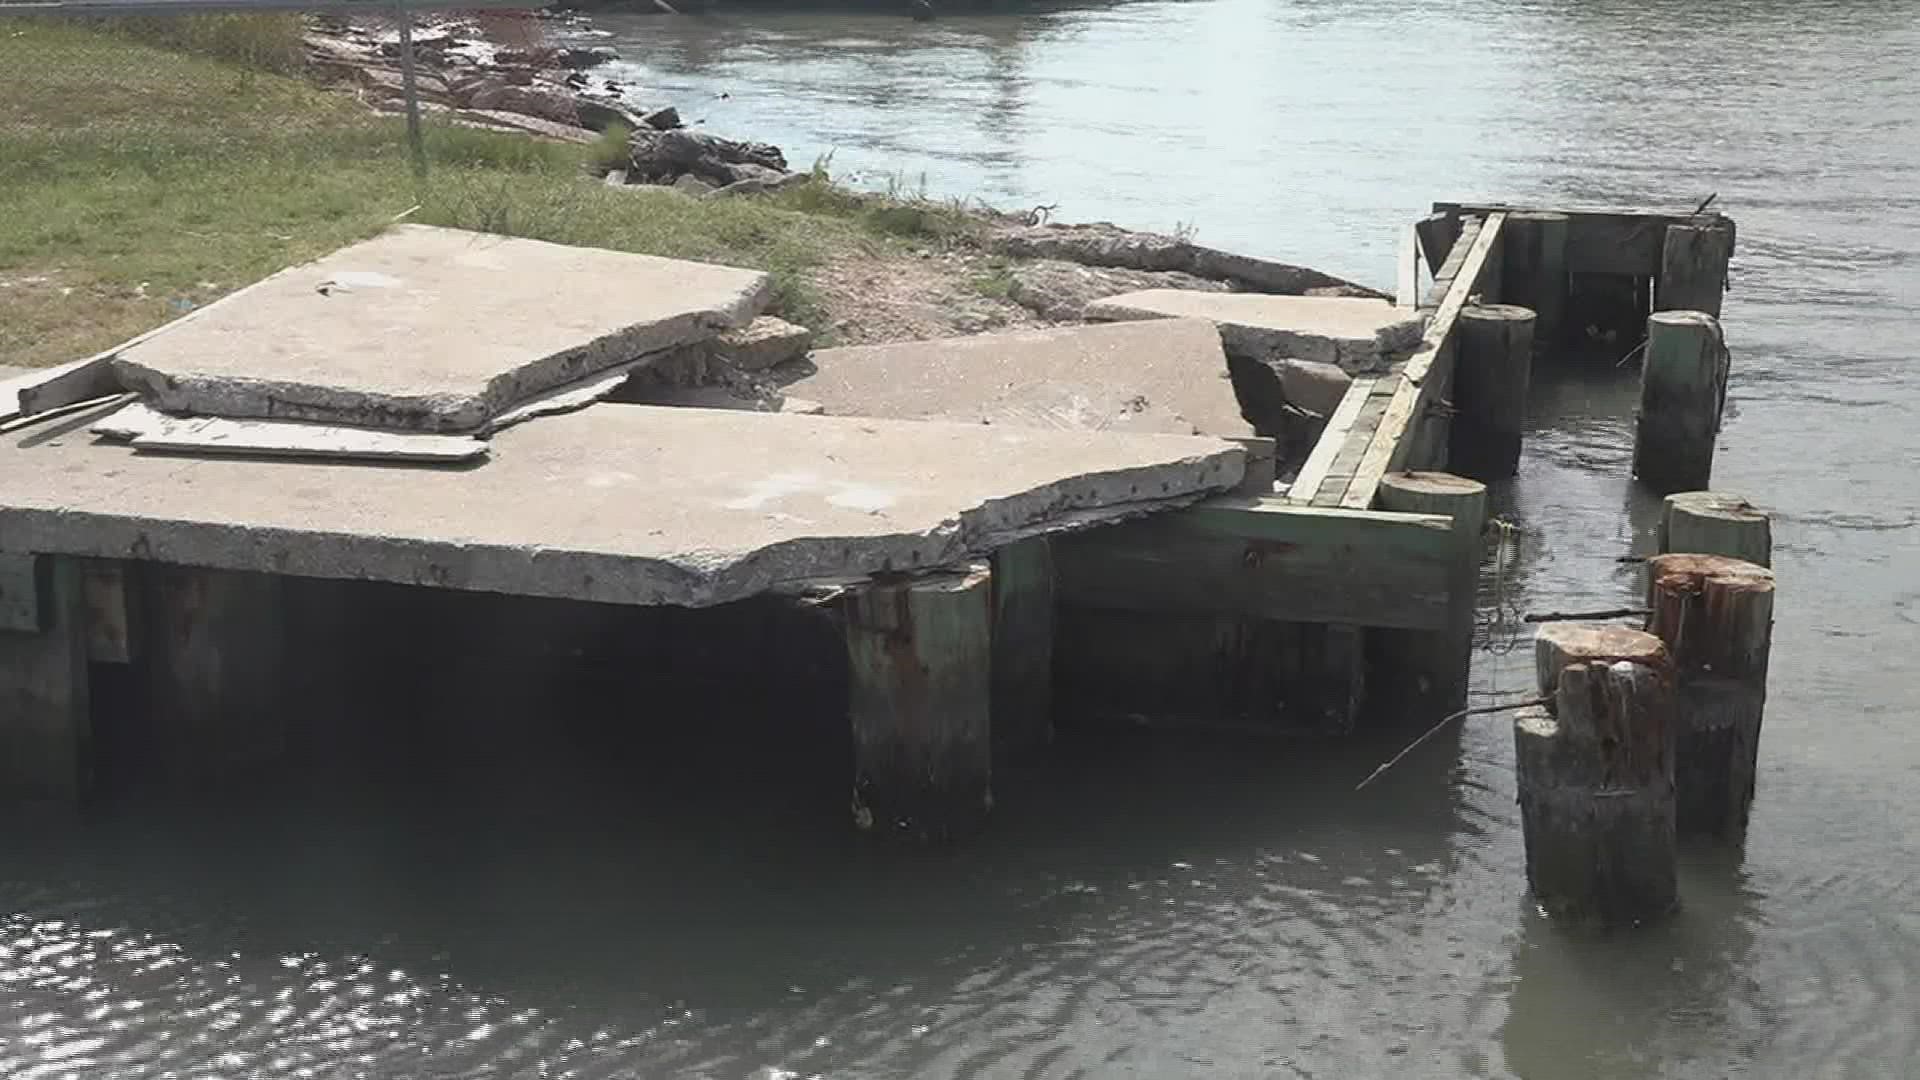 While the cost of the project has gone up due to inflation, they say they remain committed to fixing up the boat ramp.